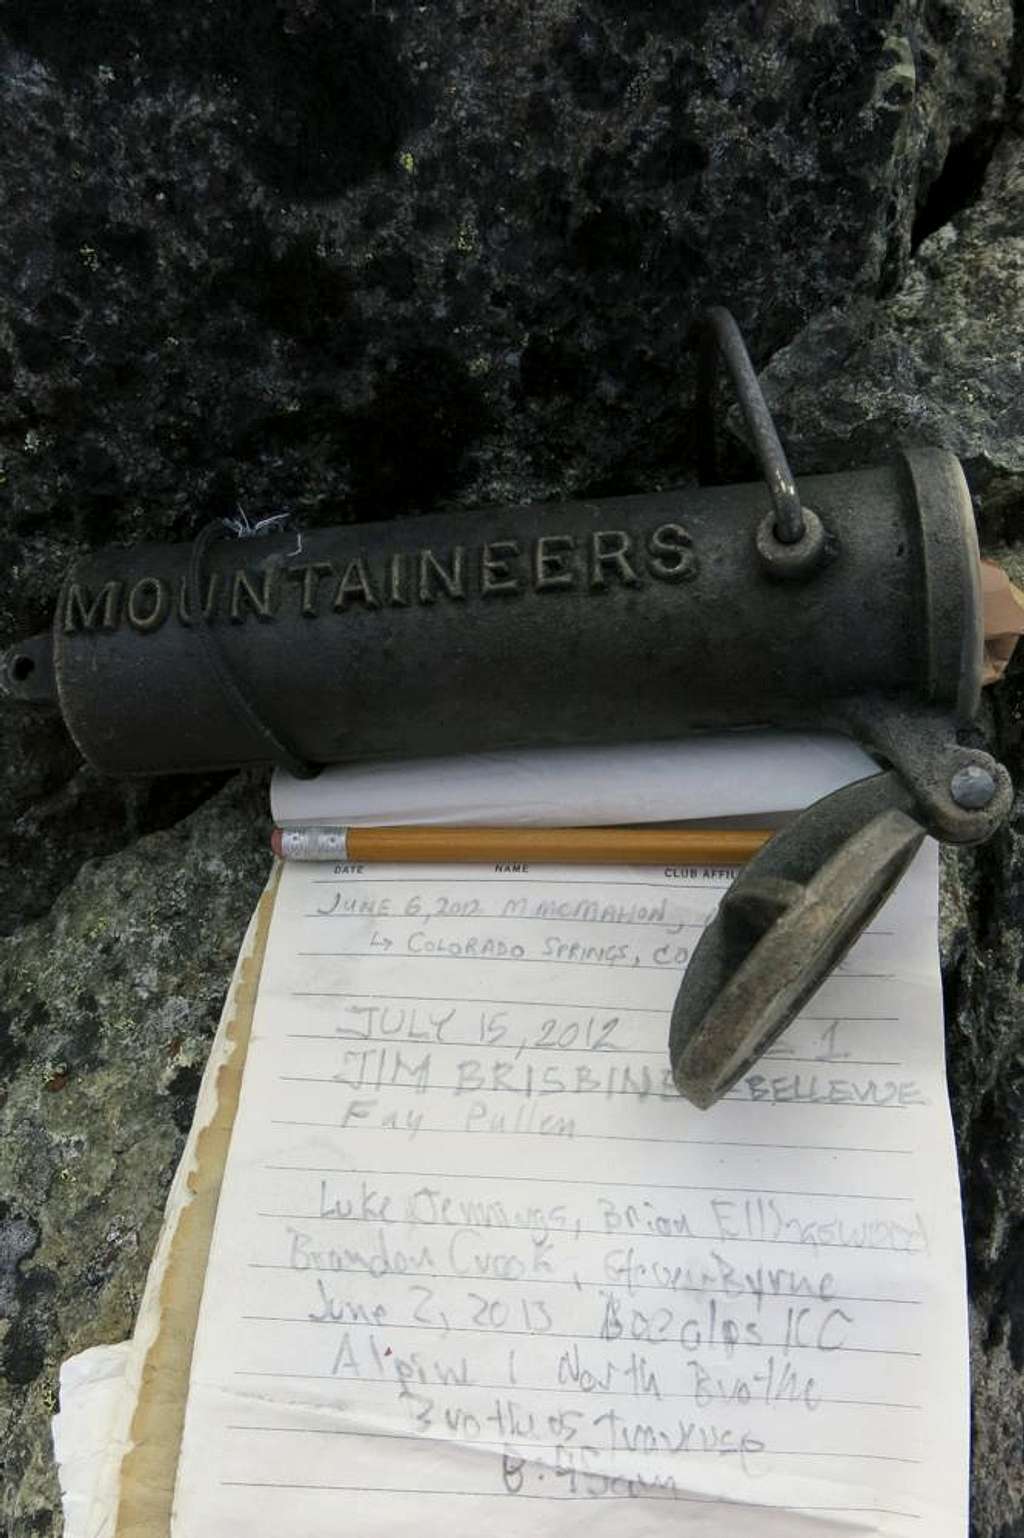 Summit Register at the Brothers North Summit